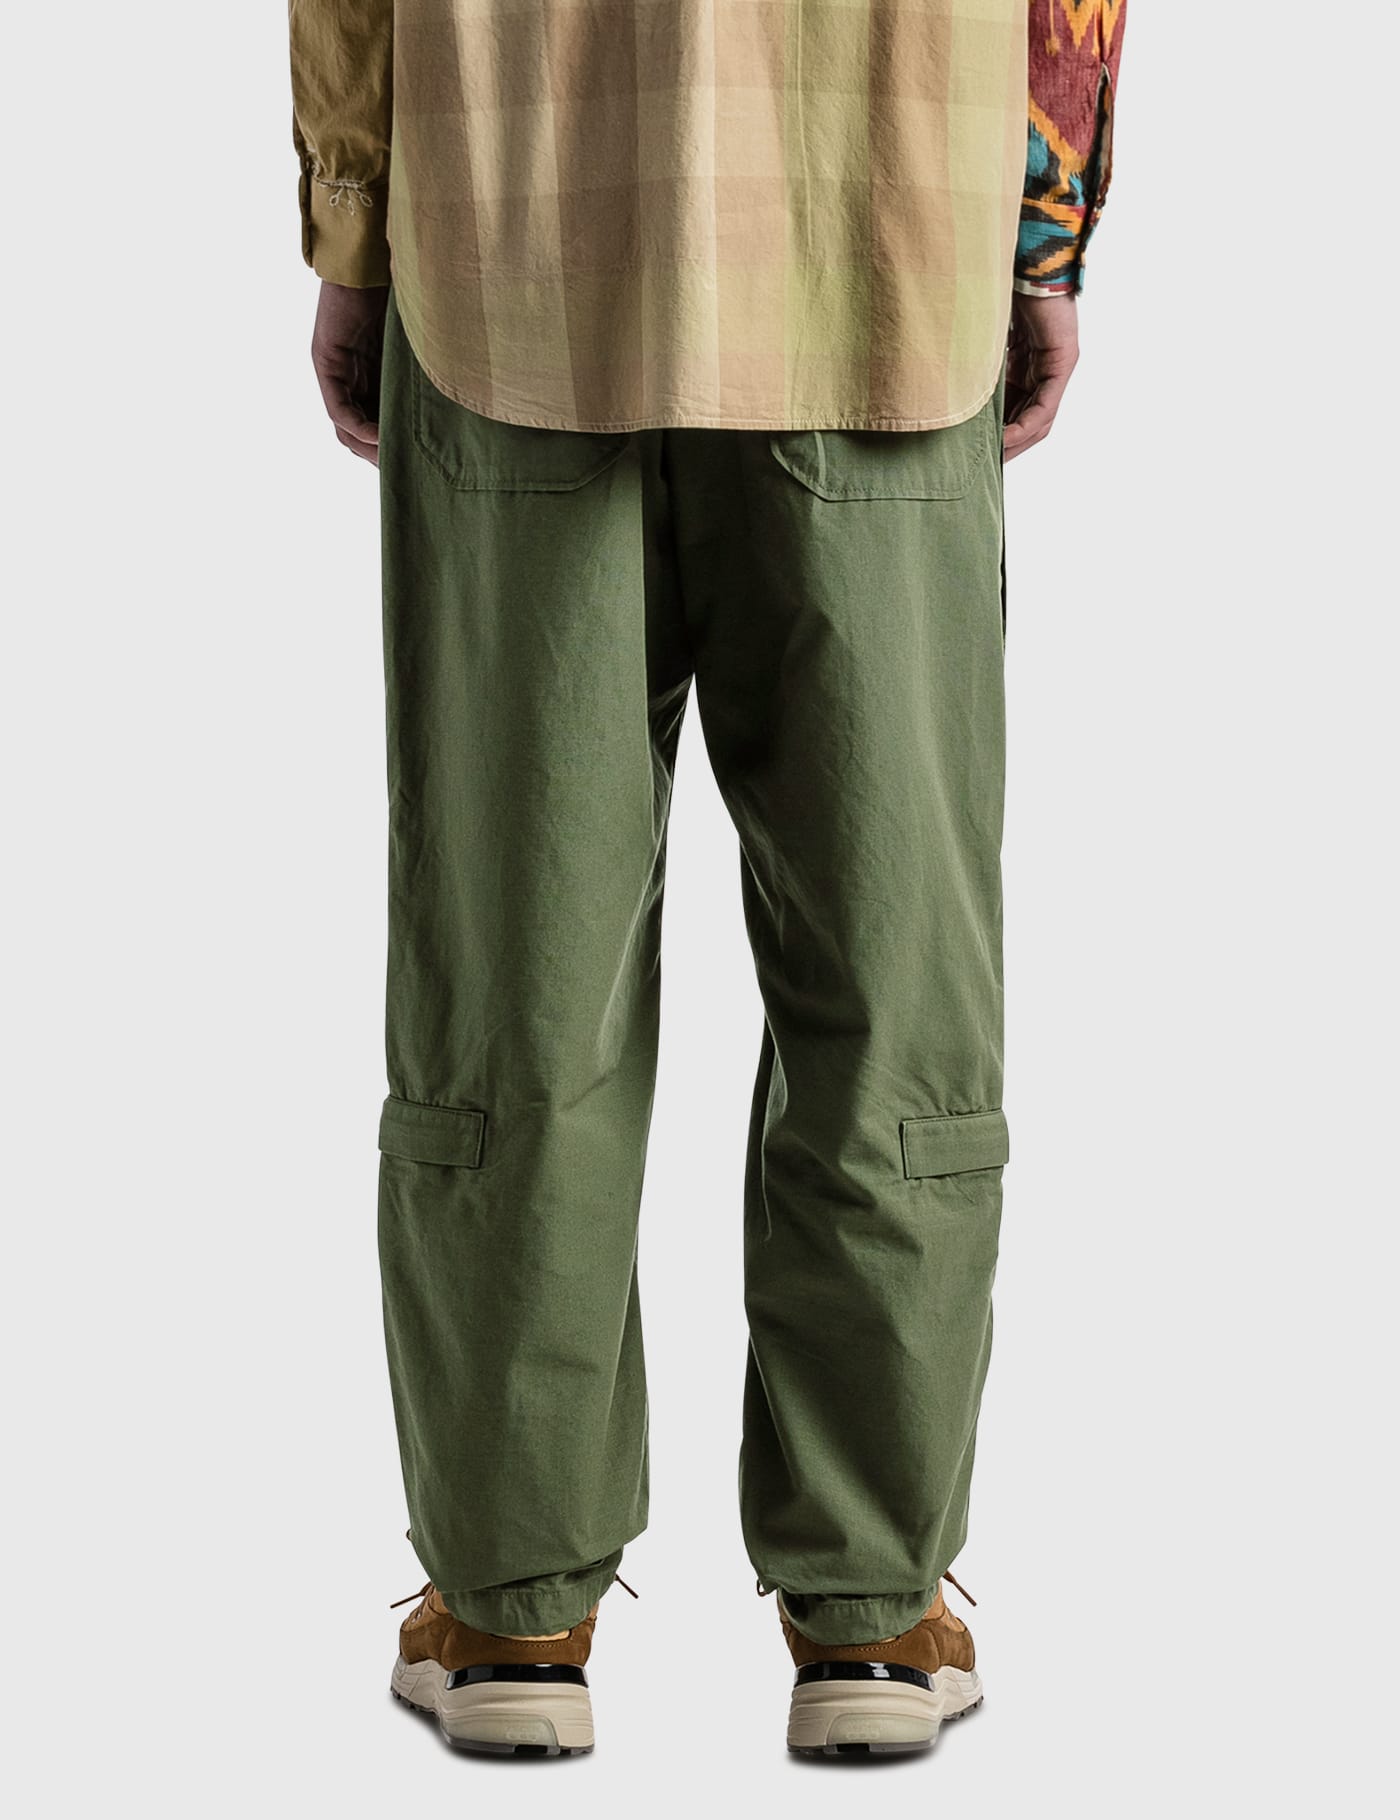 Engineered Garments - Aircrew Pants | HBX - Globally Curated 